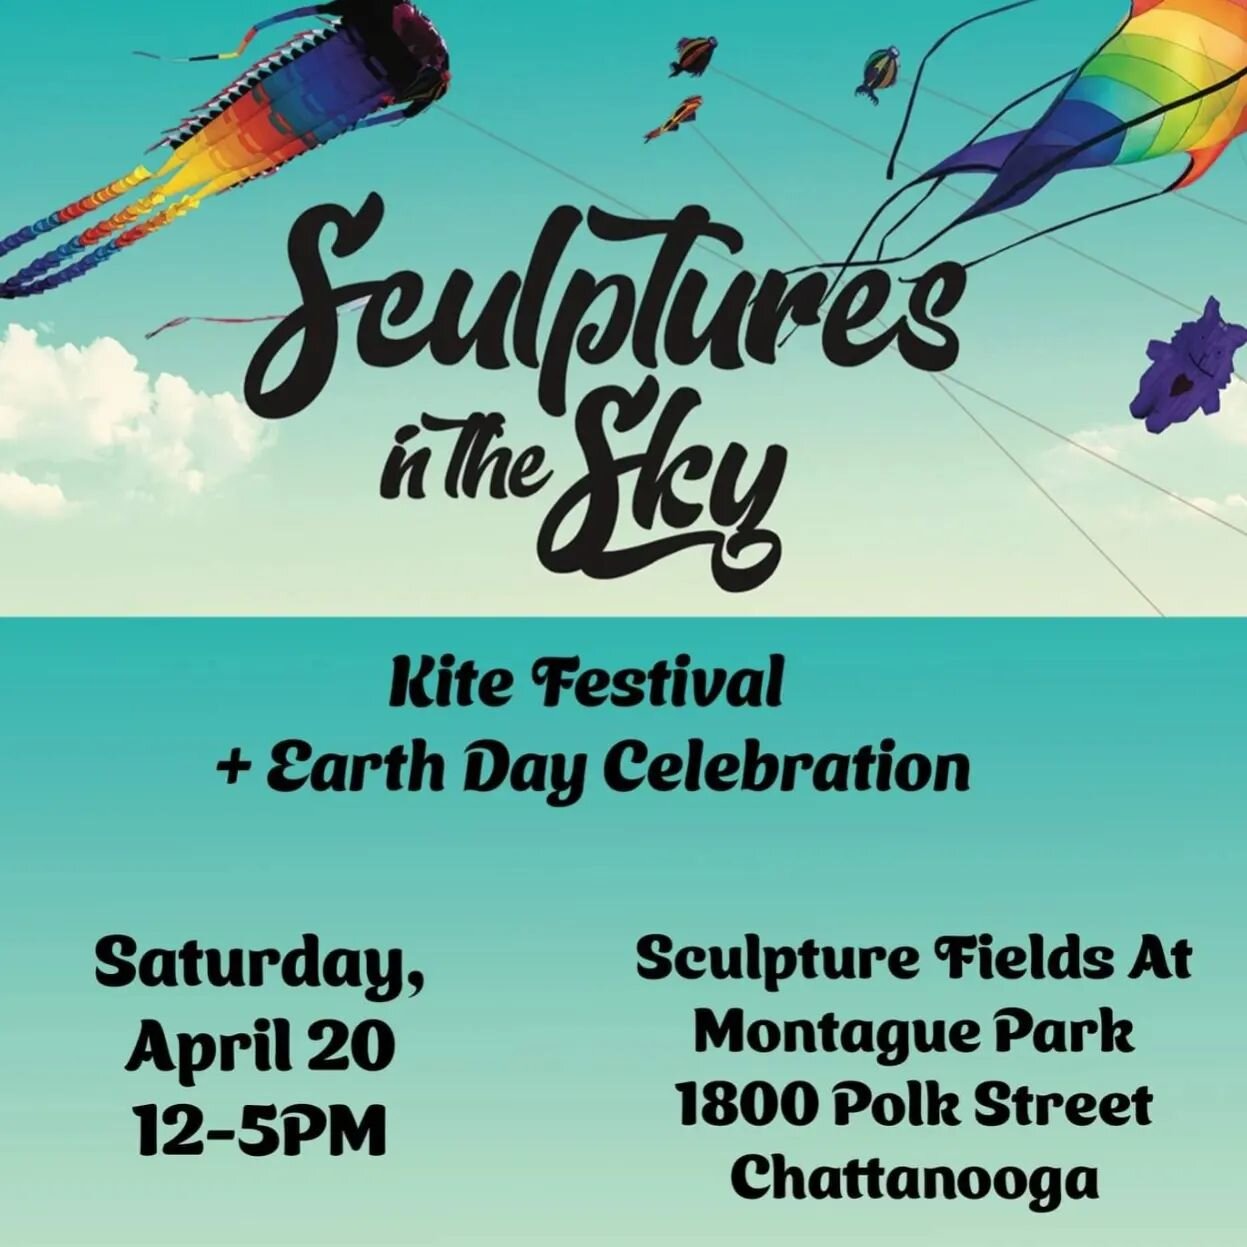 🪁 Join us in two weeks at our annual family-friendly Sculptures In The Sky kite flying event, plus a celebration of Earth Day! 🌎 All are welcome! Free entry